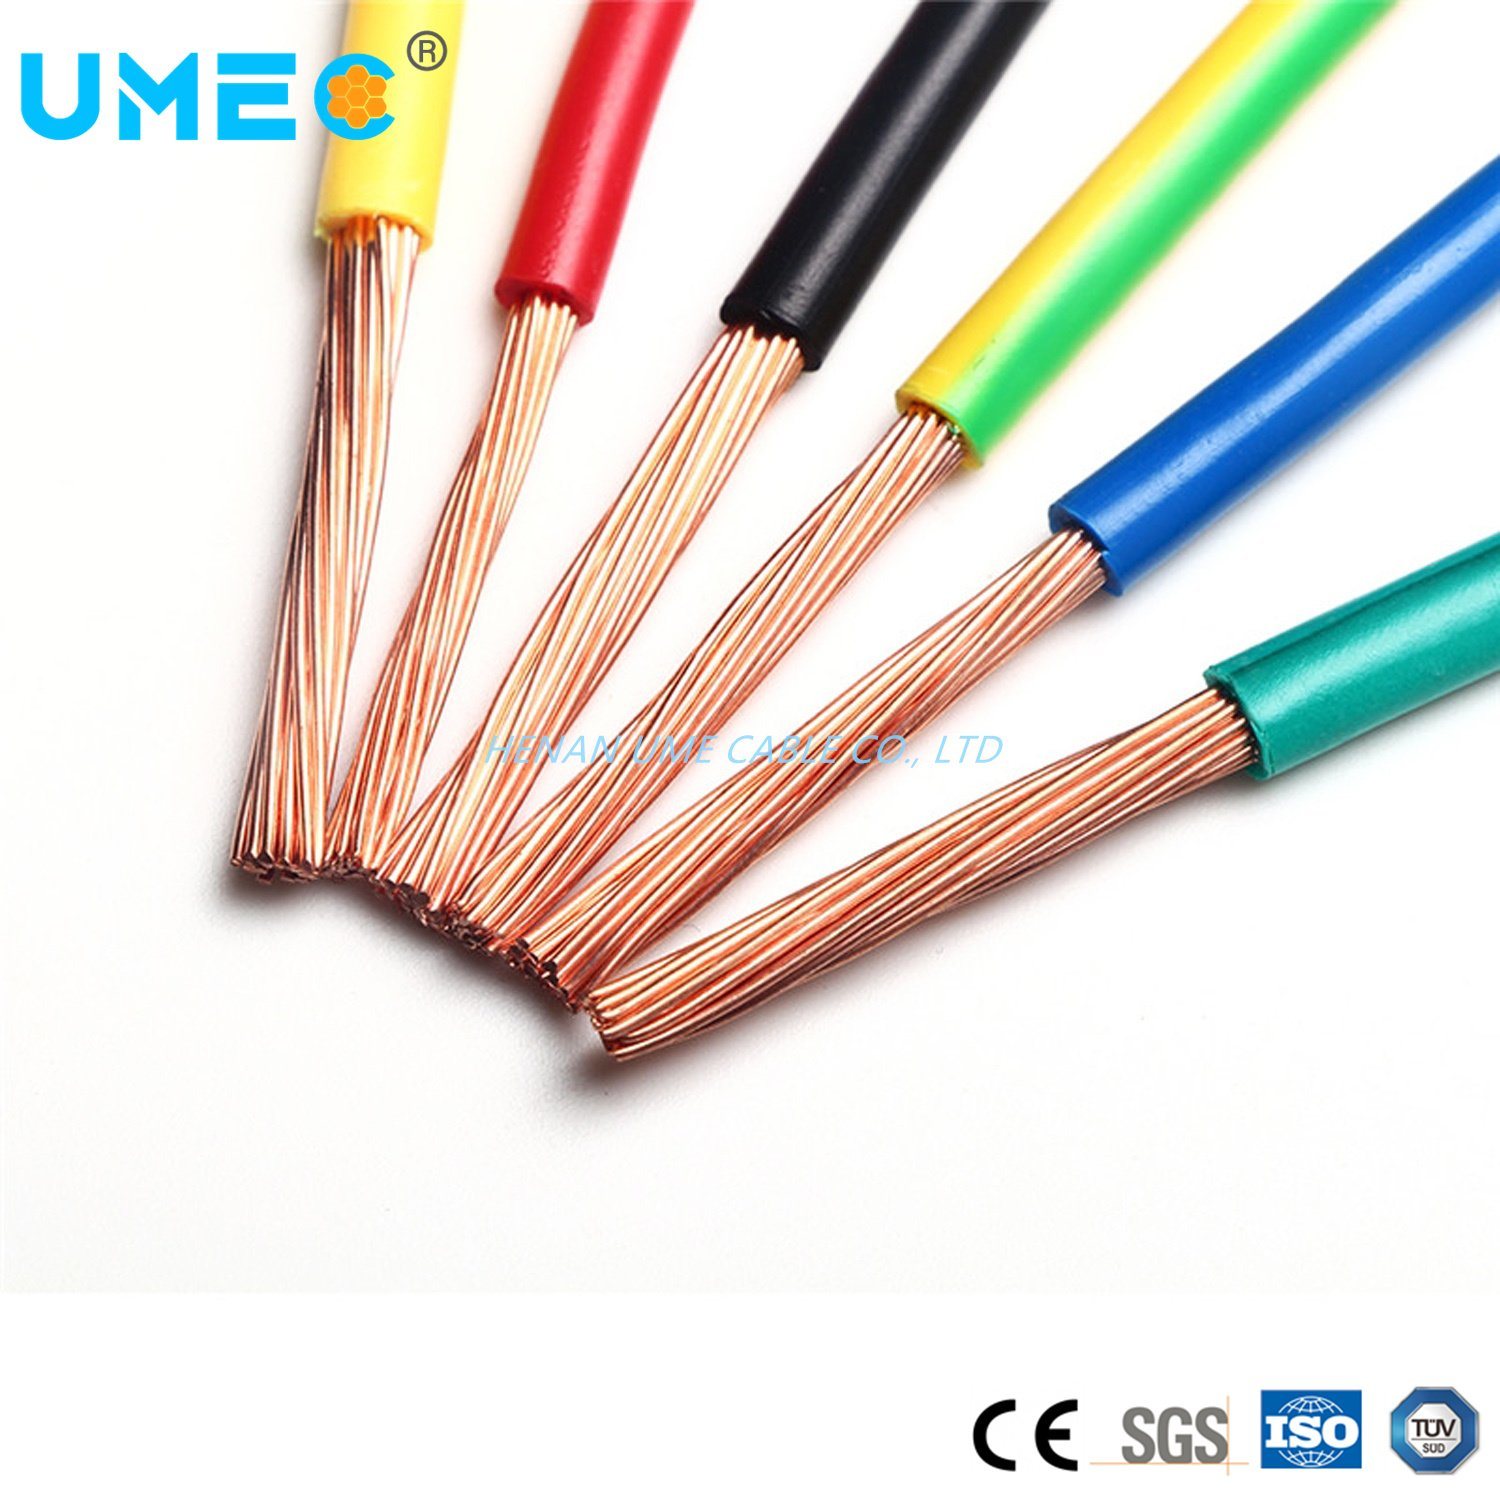 House Wiring PVC Coated Copper Wire 1/2.25mm 7/1.35mm 19/1.78mm 37/2.03mm BV Wire